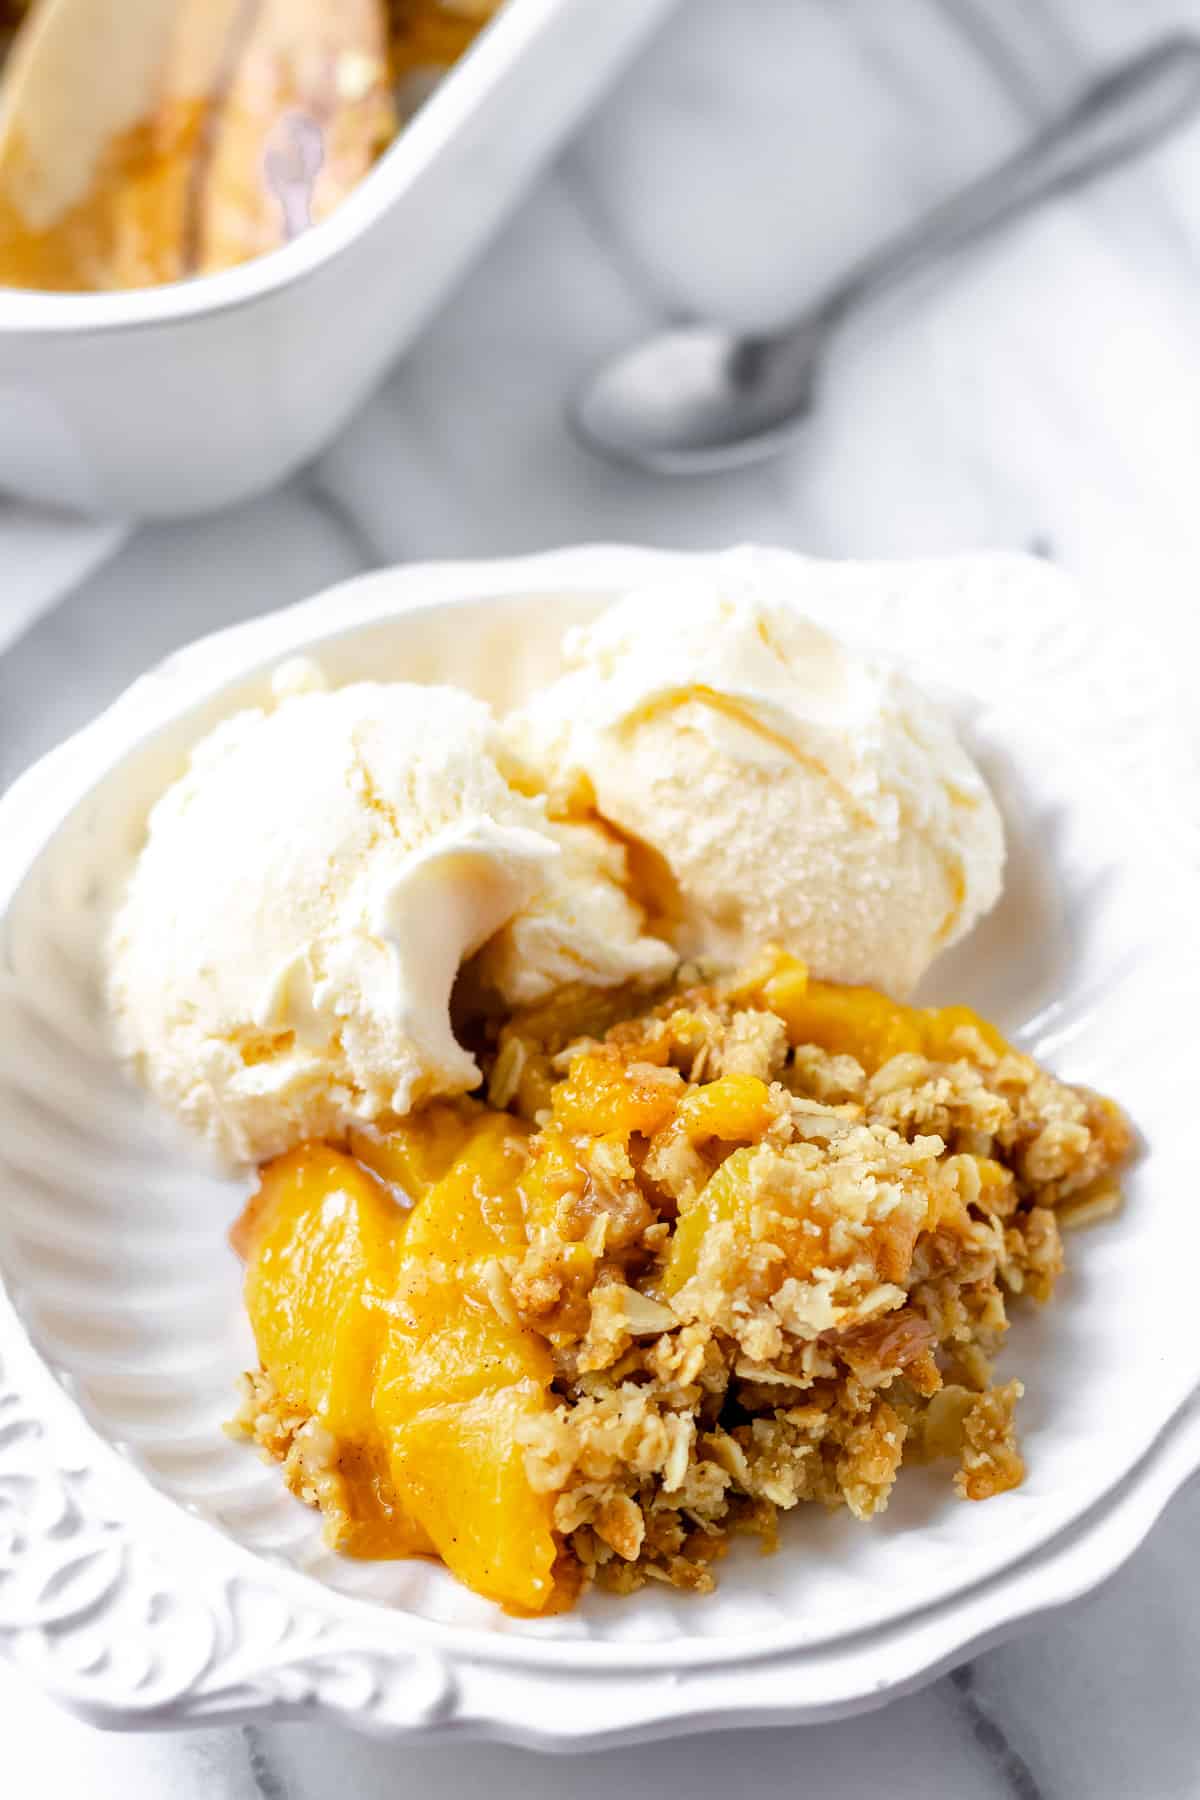 Close up of a serving of peach crisp in a white bowl with ice cream and a spoon and part of the baking dish in the background